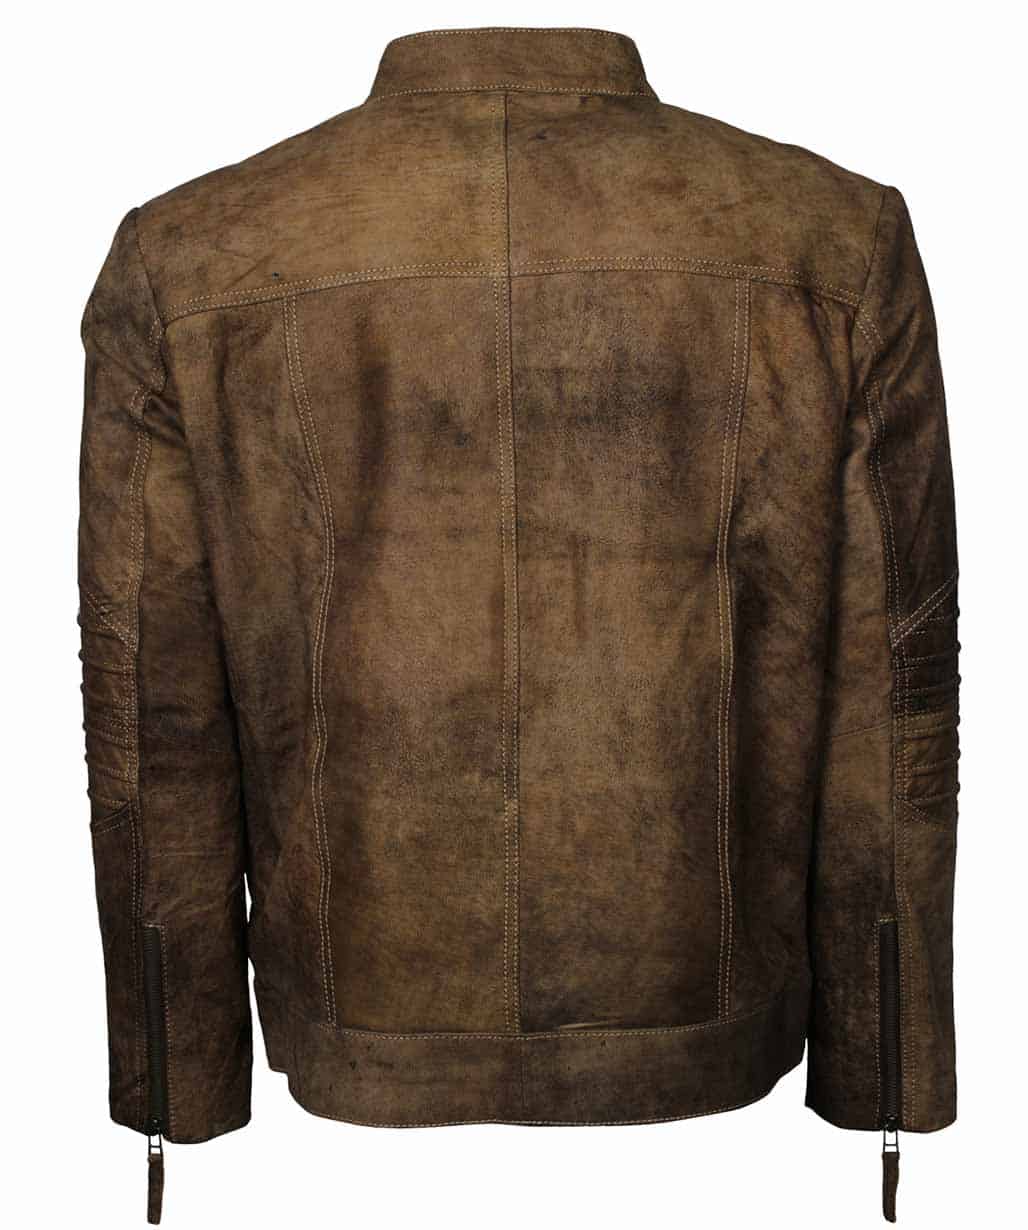 tryphone-brown-distressed-leather-jacket-online-USA